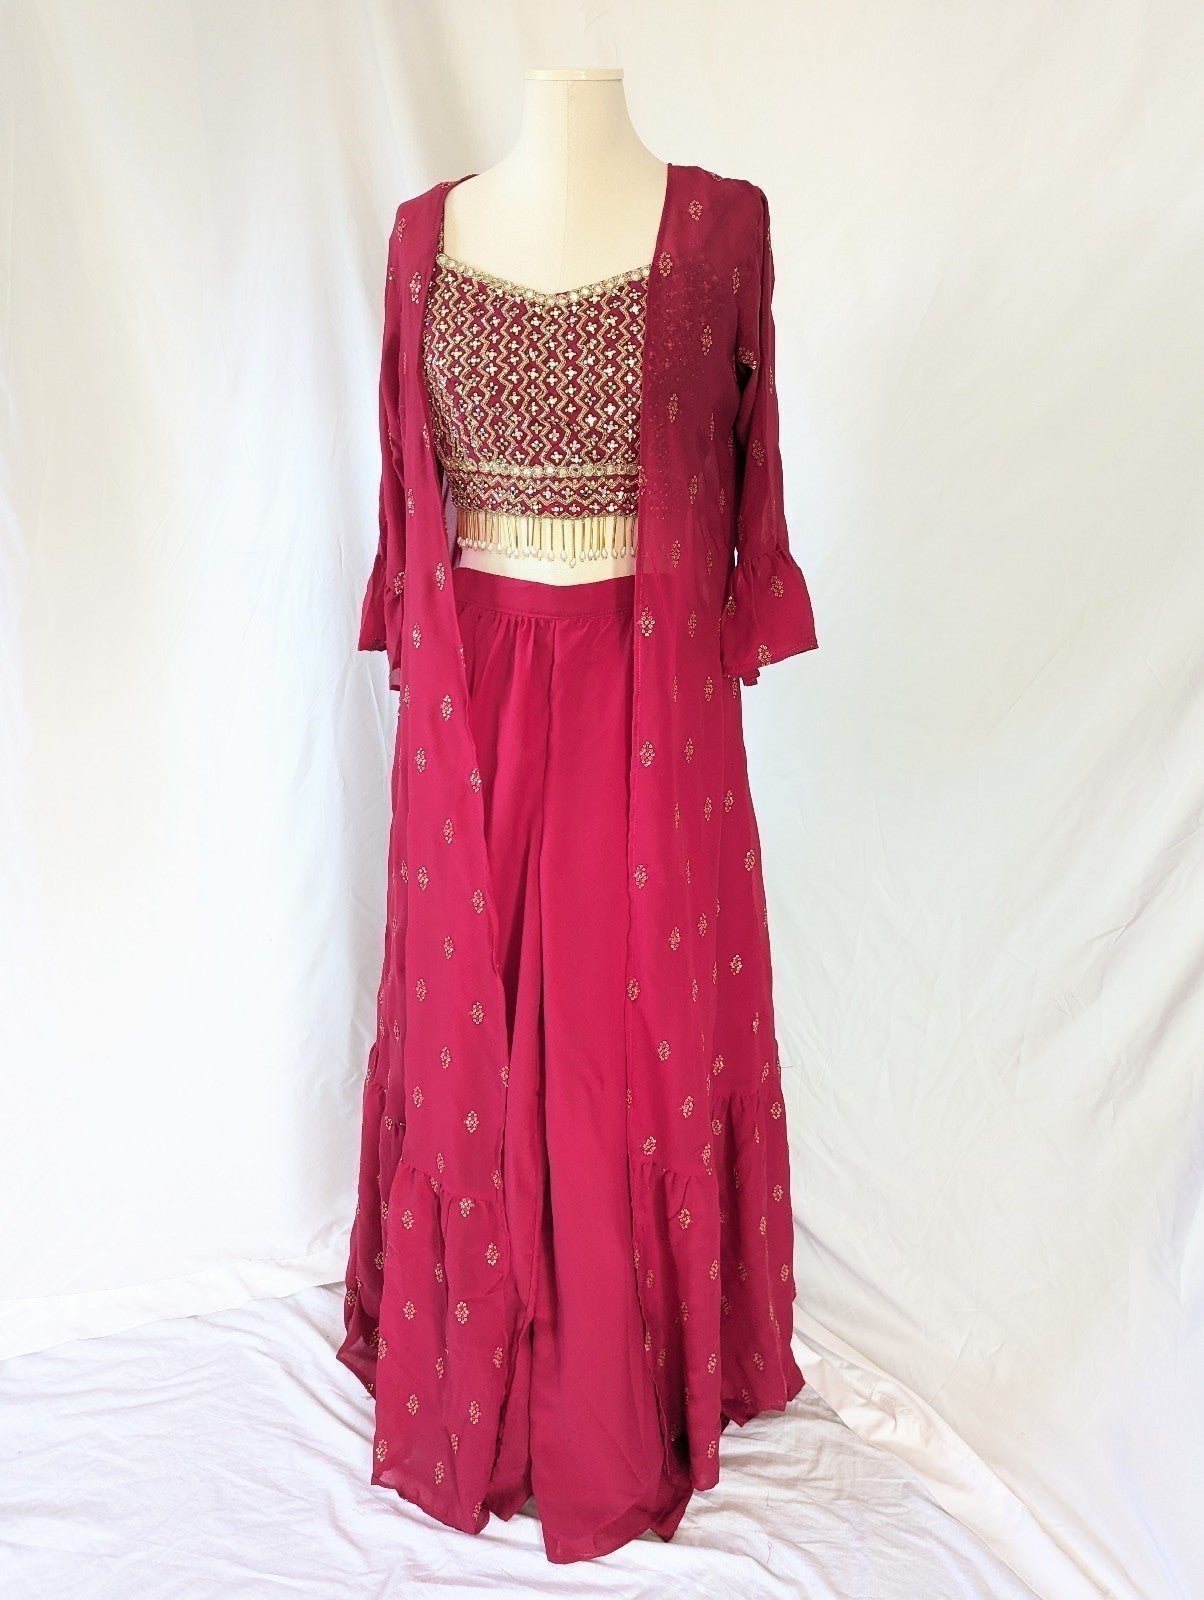 Readymade Indian wedding indo western palazzo outfit with long Jacket. PbLN3jTq1